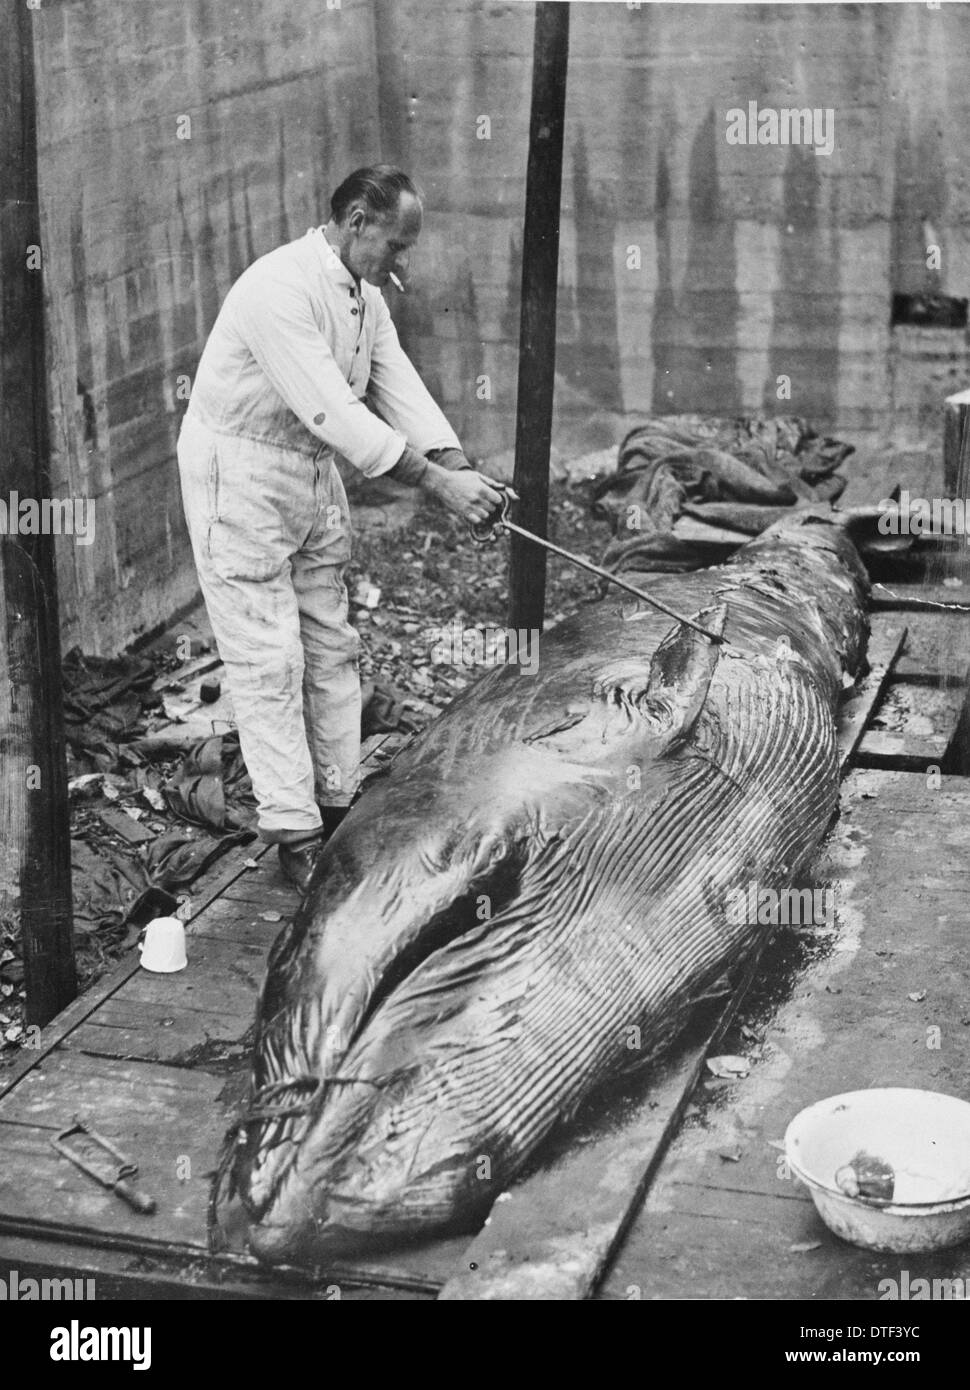 Working on whale carcass, 1930s Stock Photo